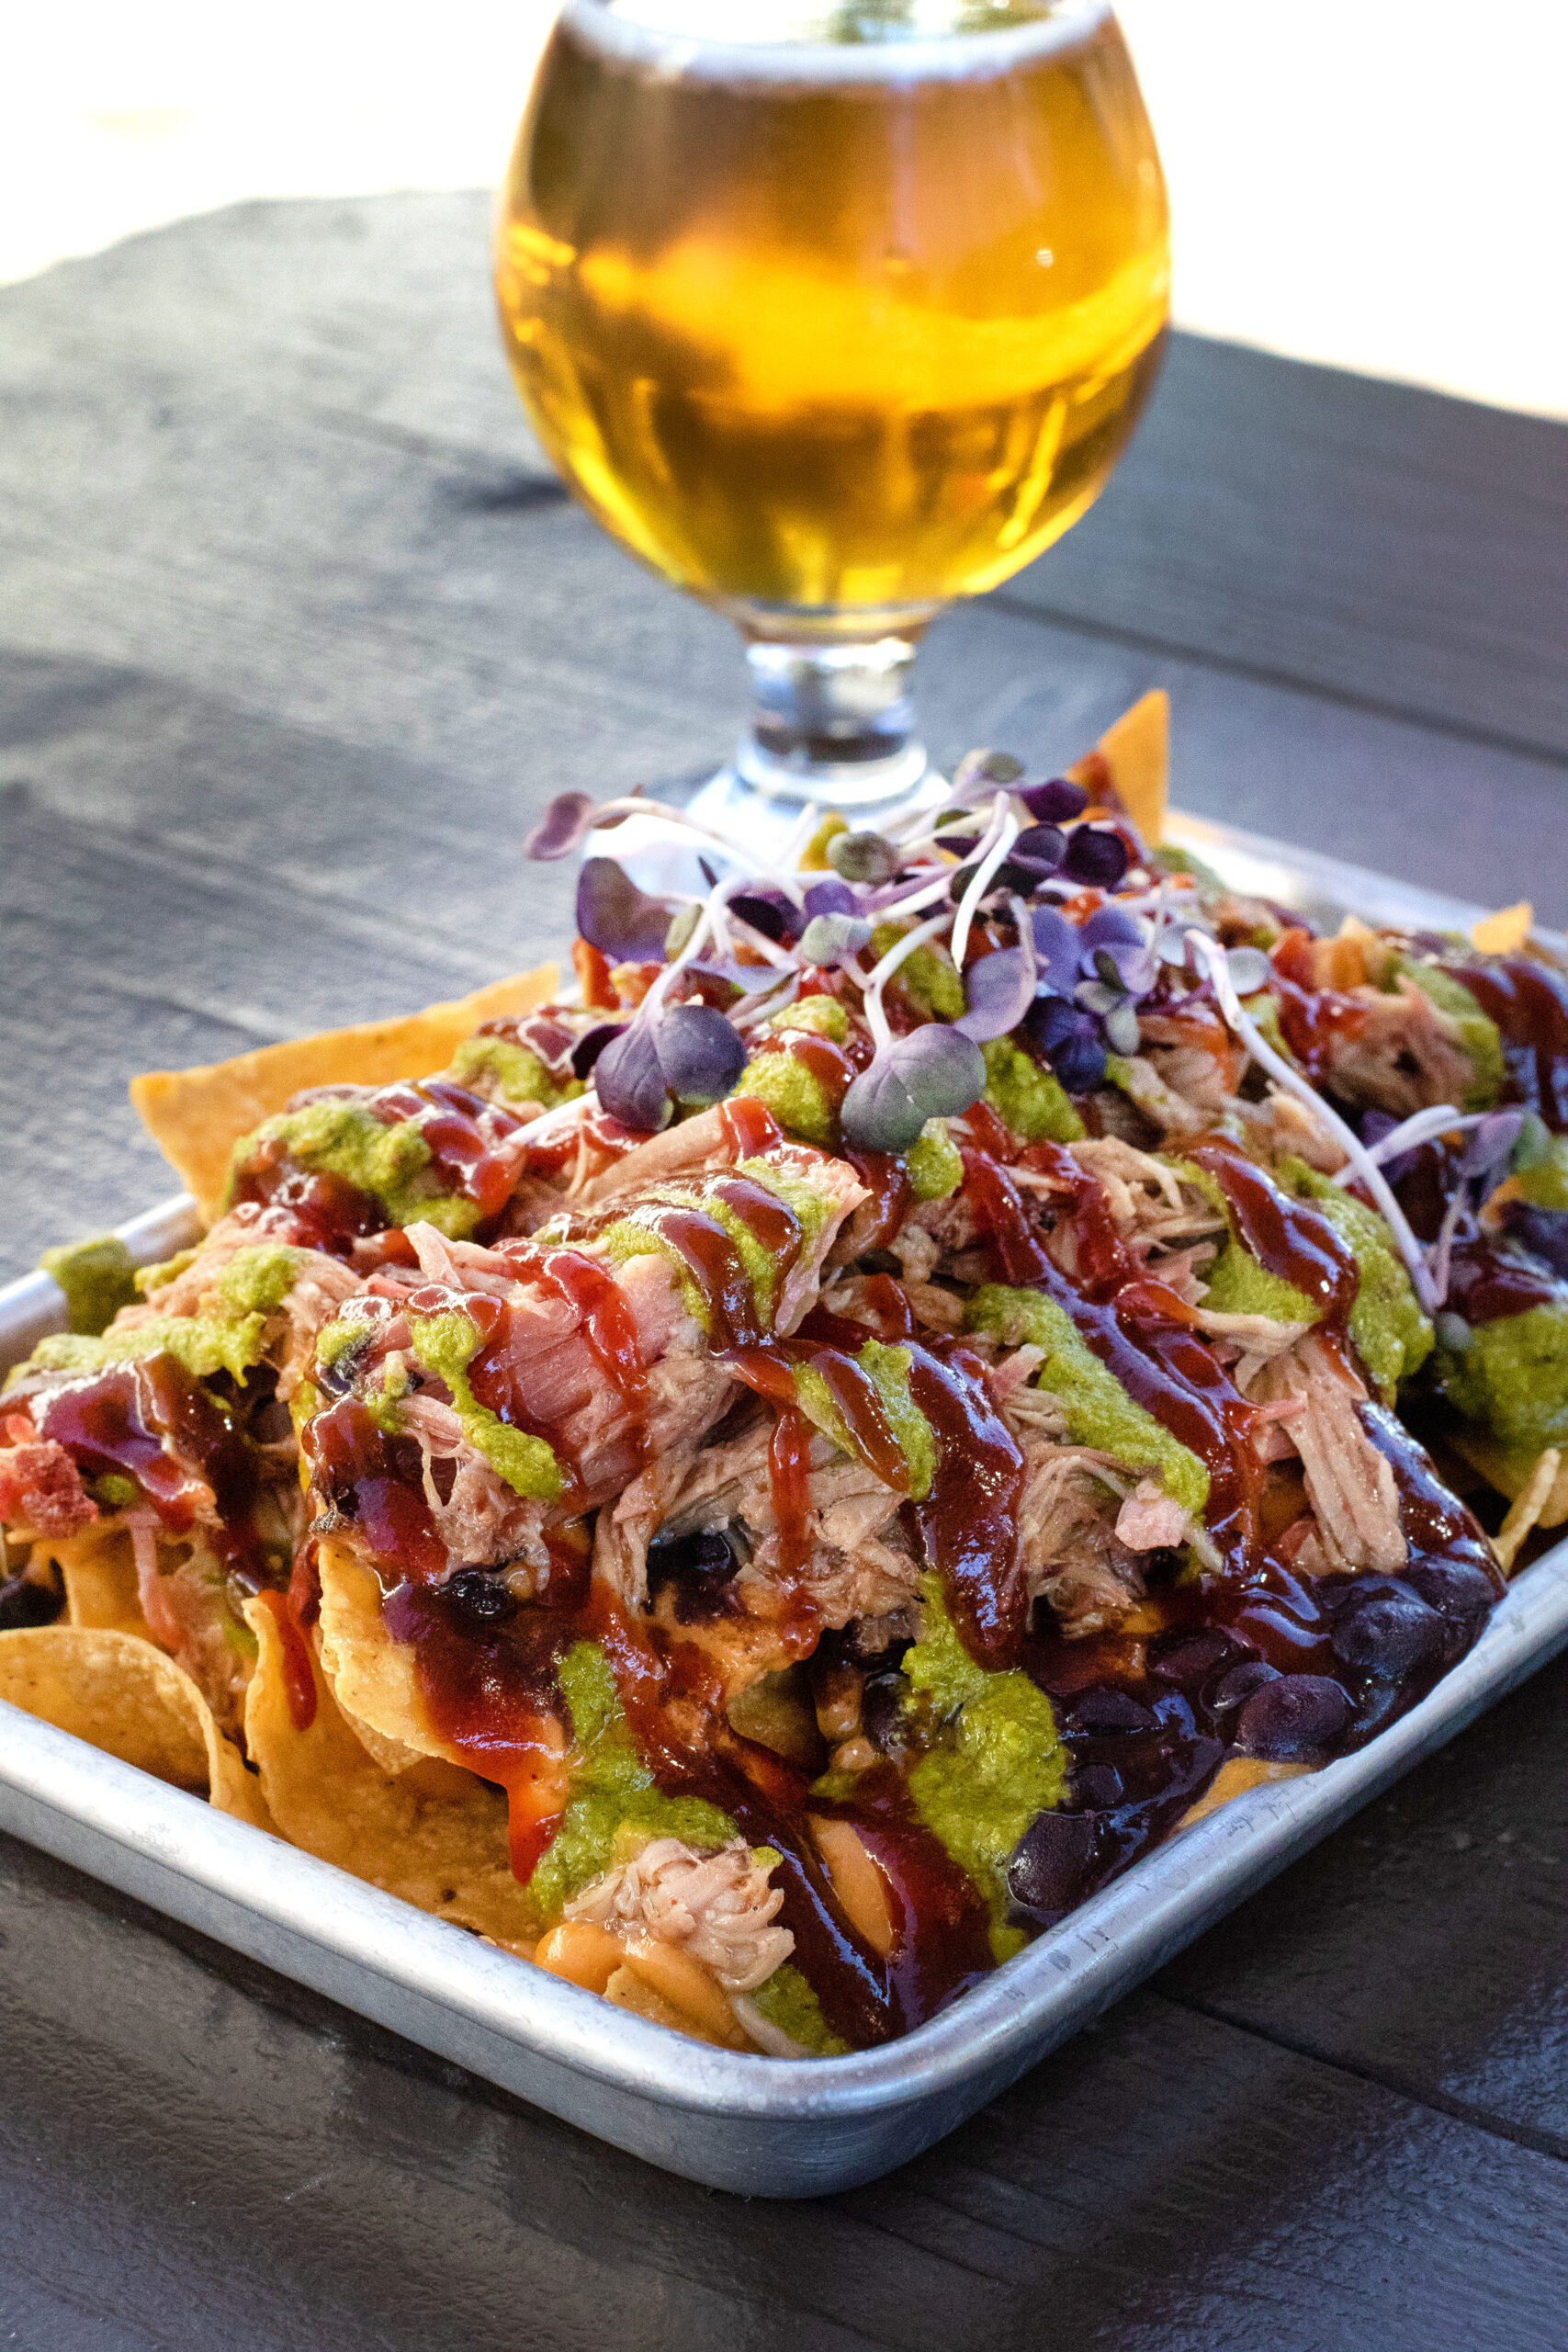 Barbecue nachos with pulled pork, nacho cheese, barbecue sauce, black beans and chimmichurri at Austin's Barbecue at Old Possum Brewing in Santa Rosa. (Heather Irwin/Sonoma Magazine)